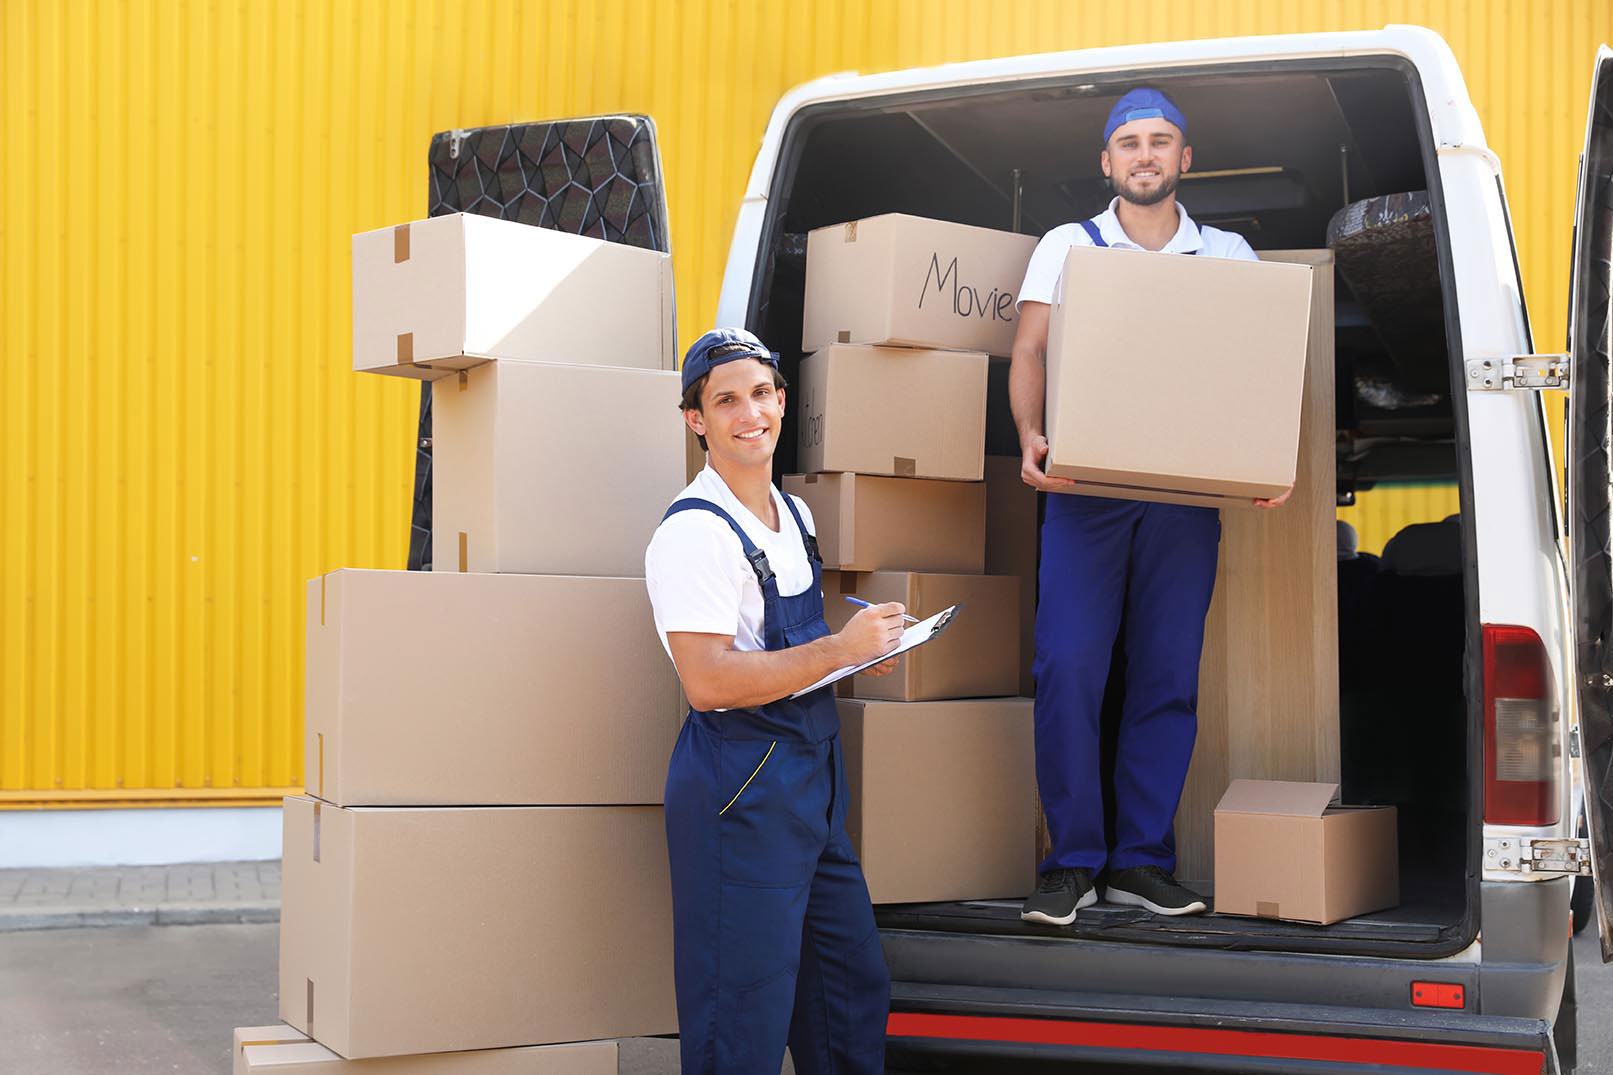 Get Help from Professional Removalists for Your Move